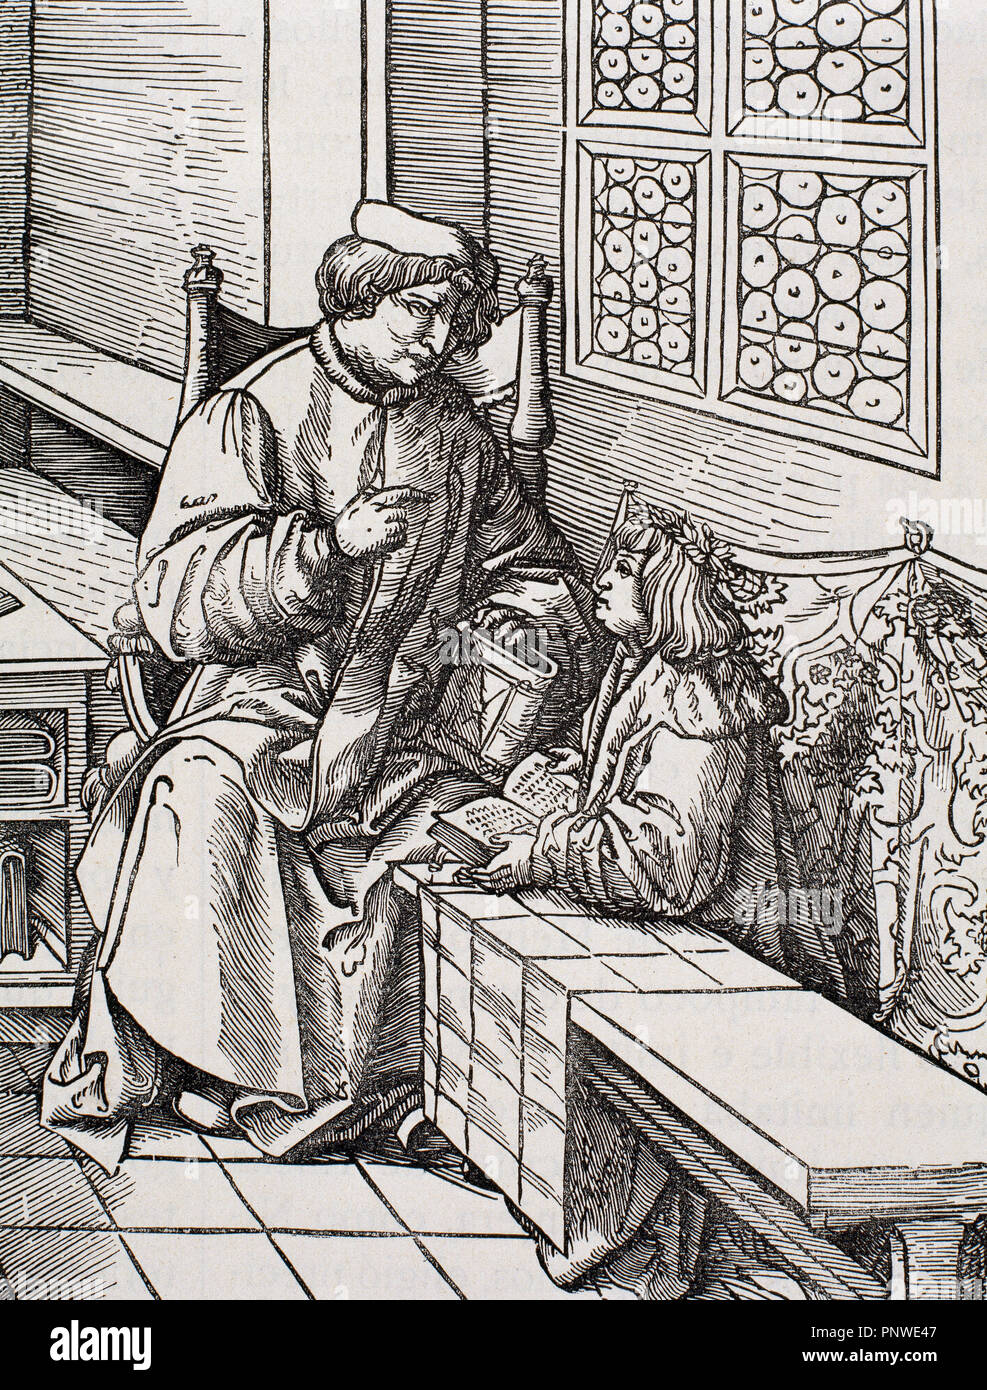 Maximilian I (1459-1519). Holy Roman Emperor (1443-1519). Copy of a woodcut by John Burgkmair, representing Maximilian child in class. Illustration Weisskuning history. Engraving. Stock Photo